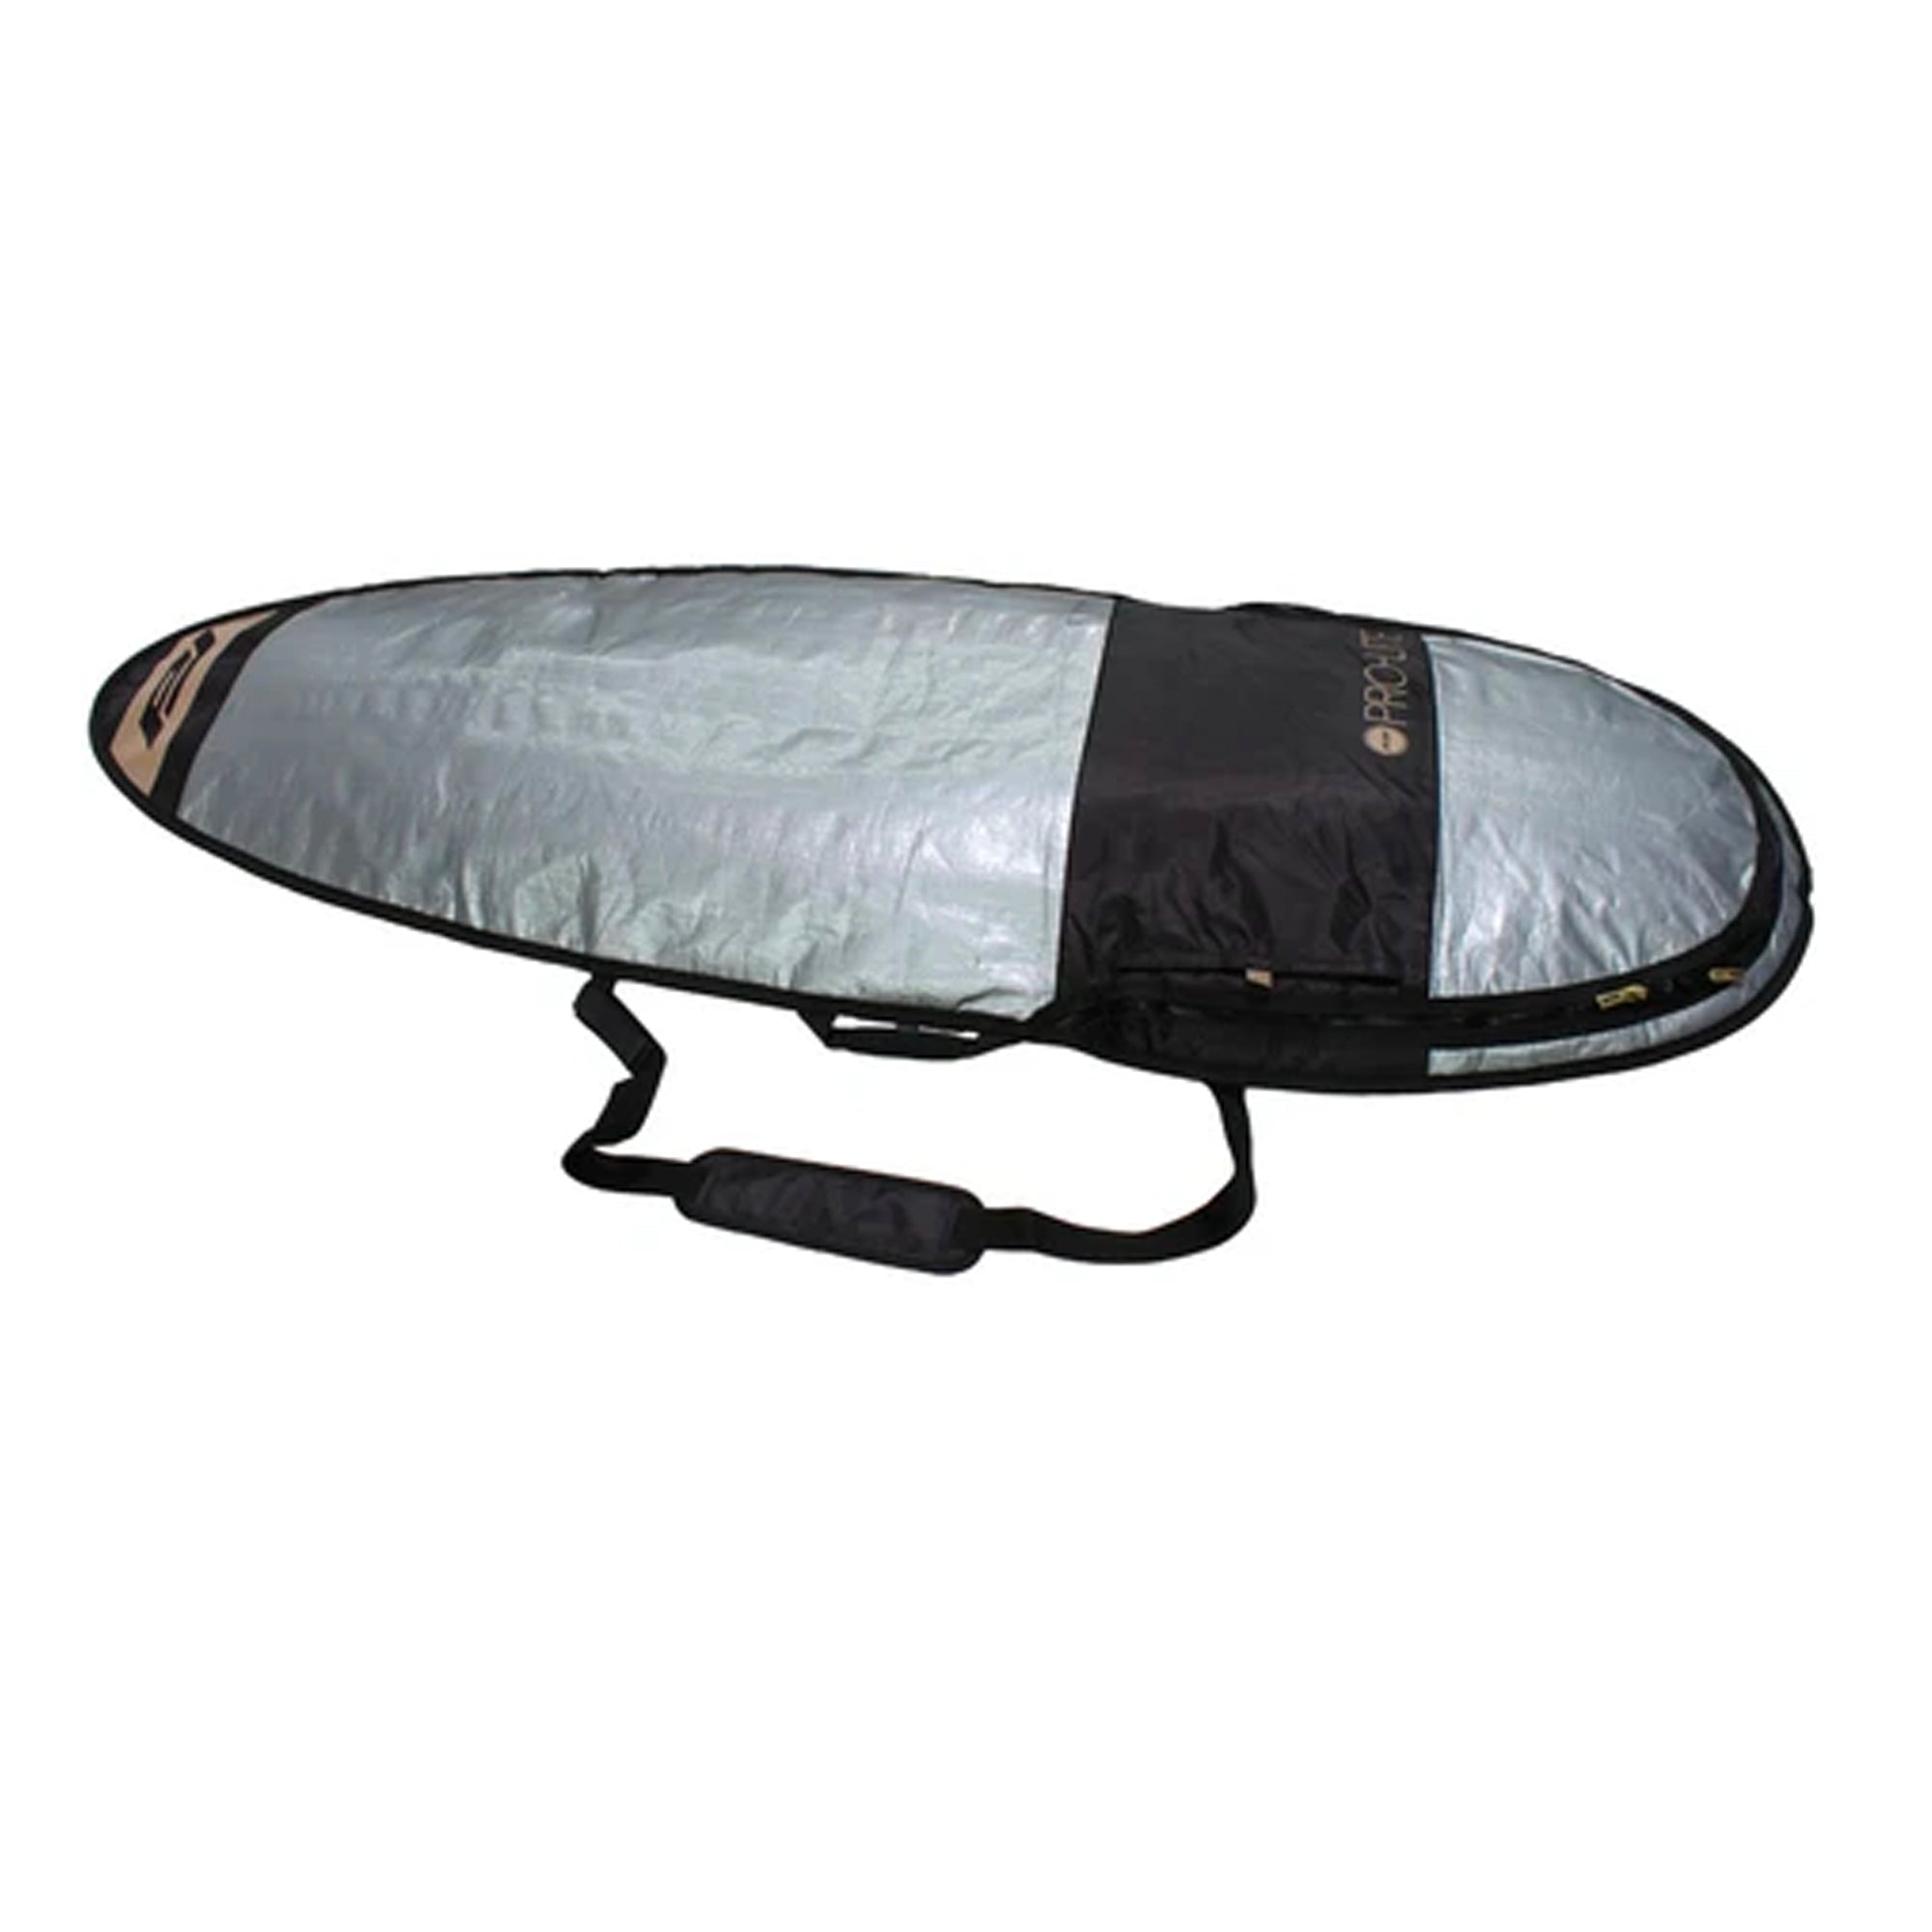 Pro-Lite Resession Day Surfboard Bag - Fish/Hybrid